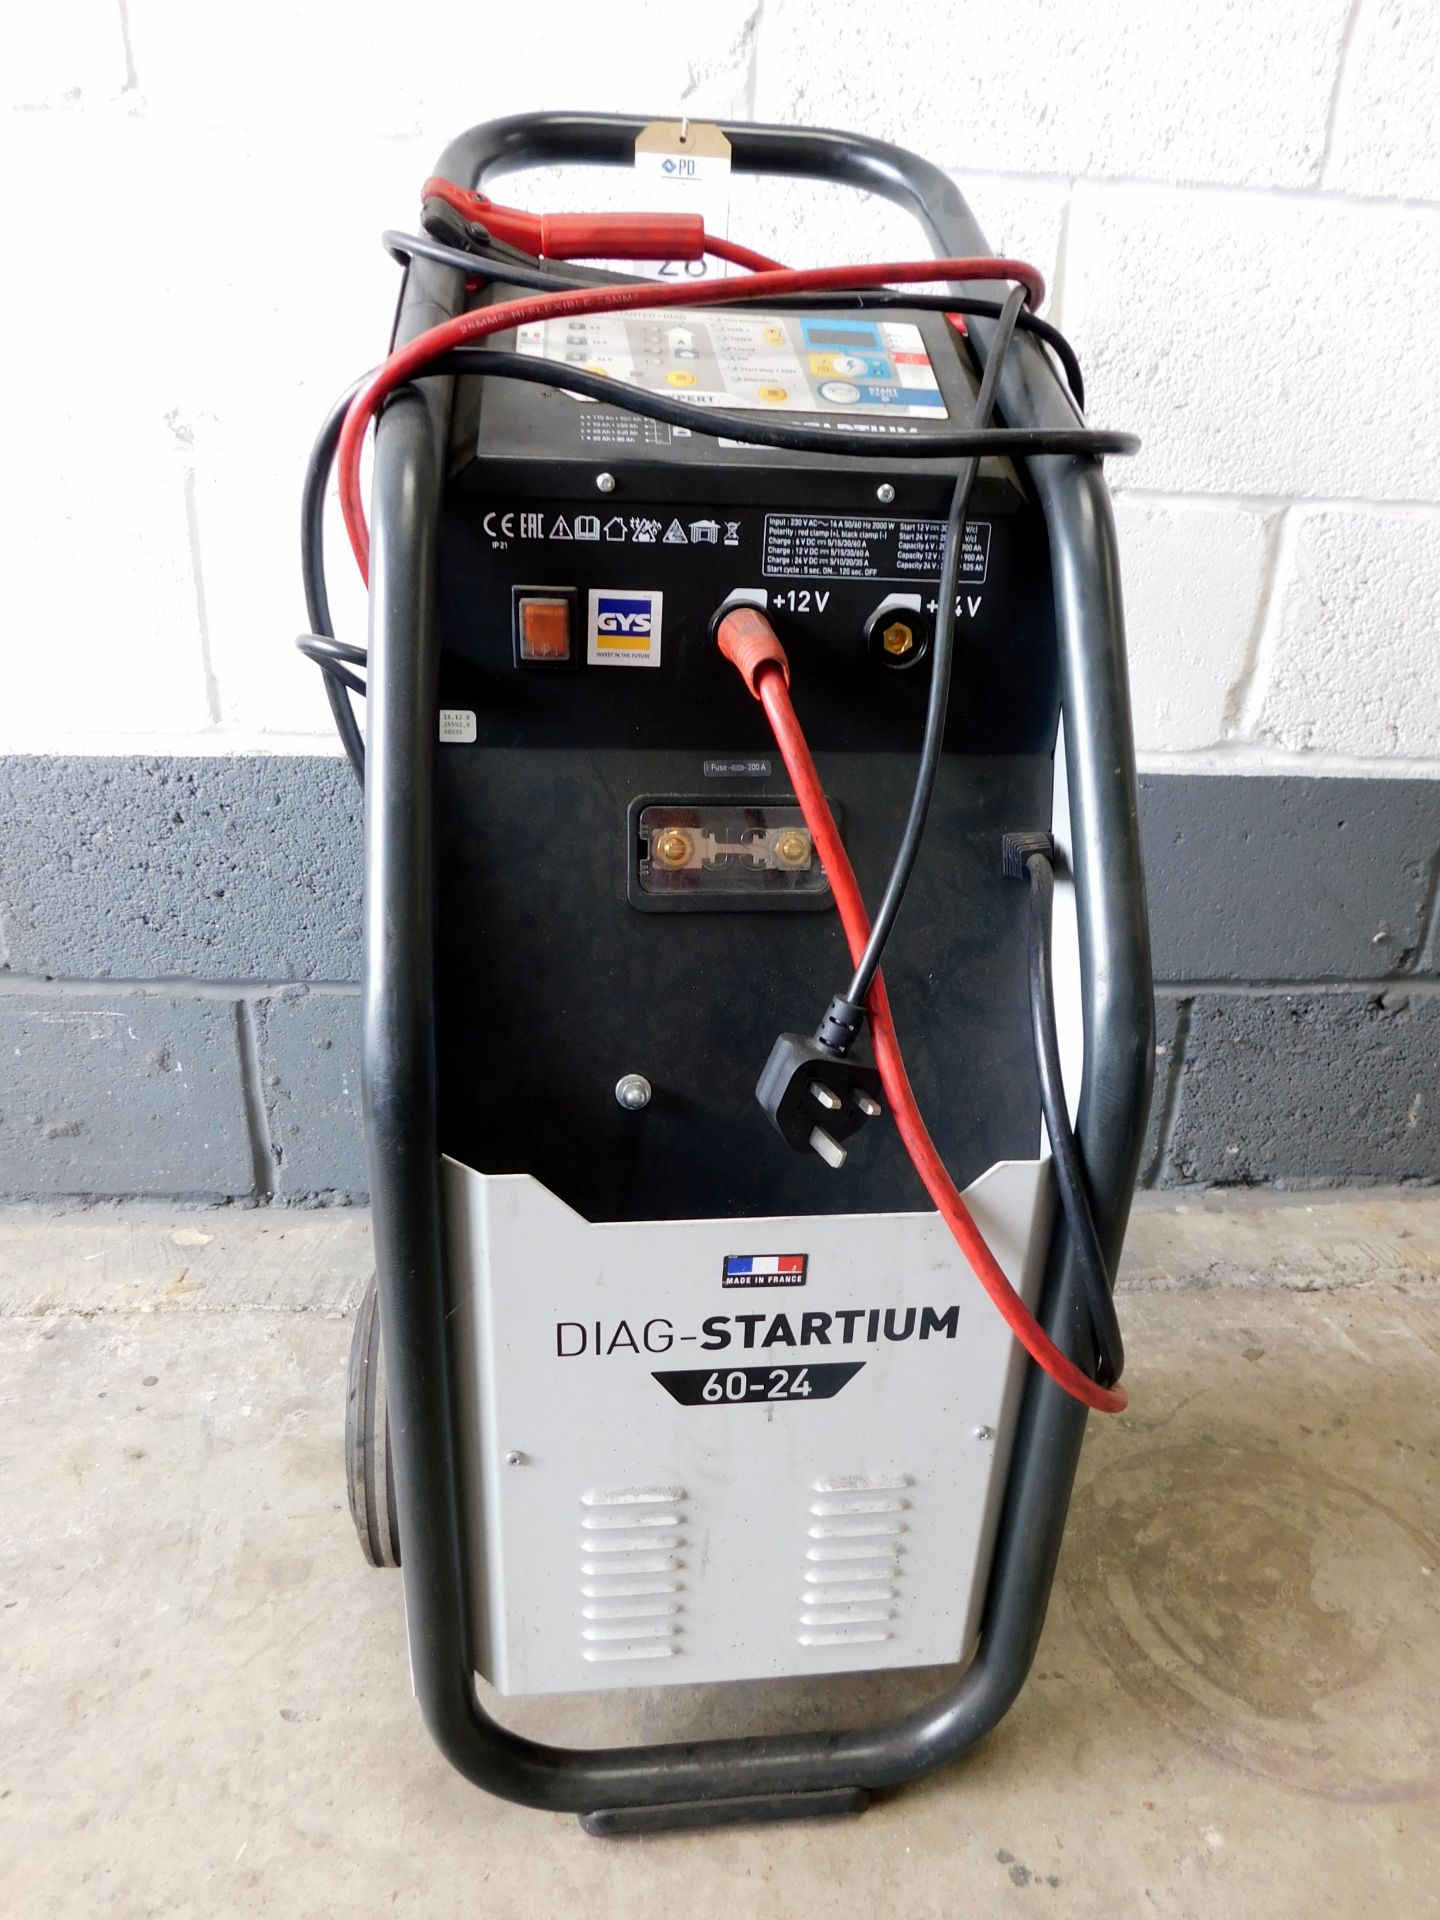 DIAG Startium 60-24 Charger - Image 2 of 2